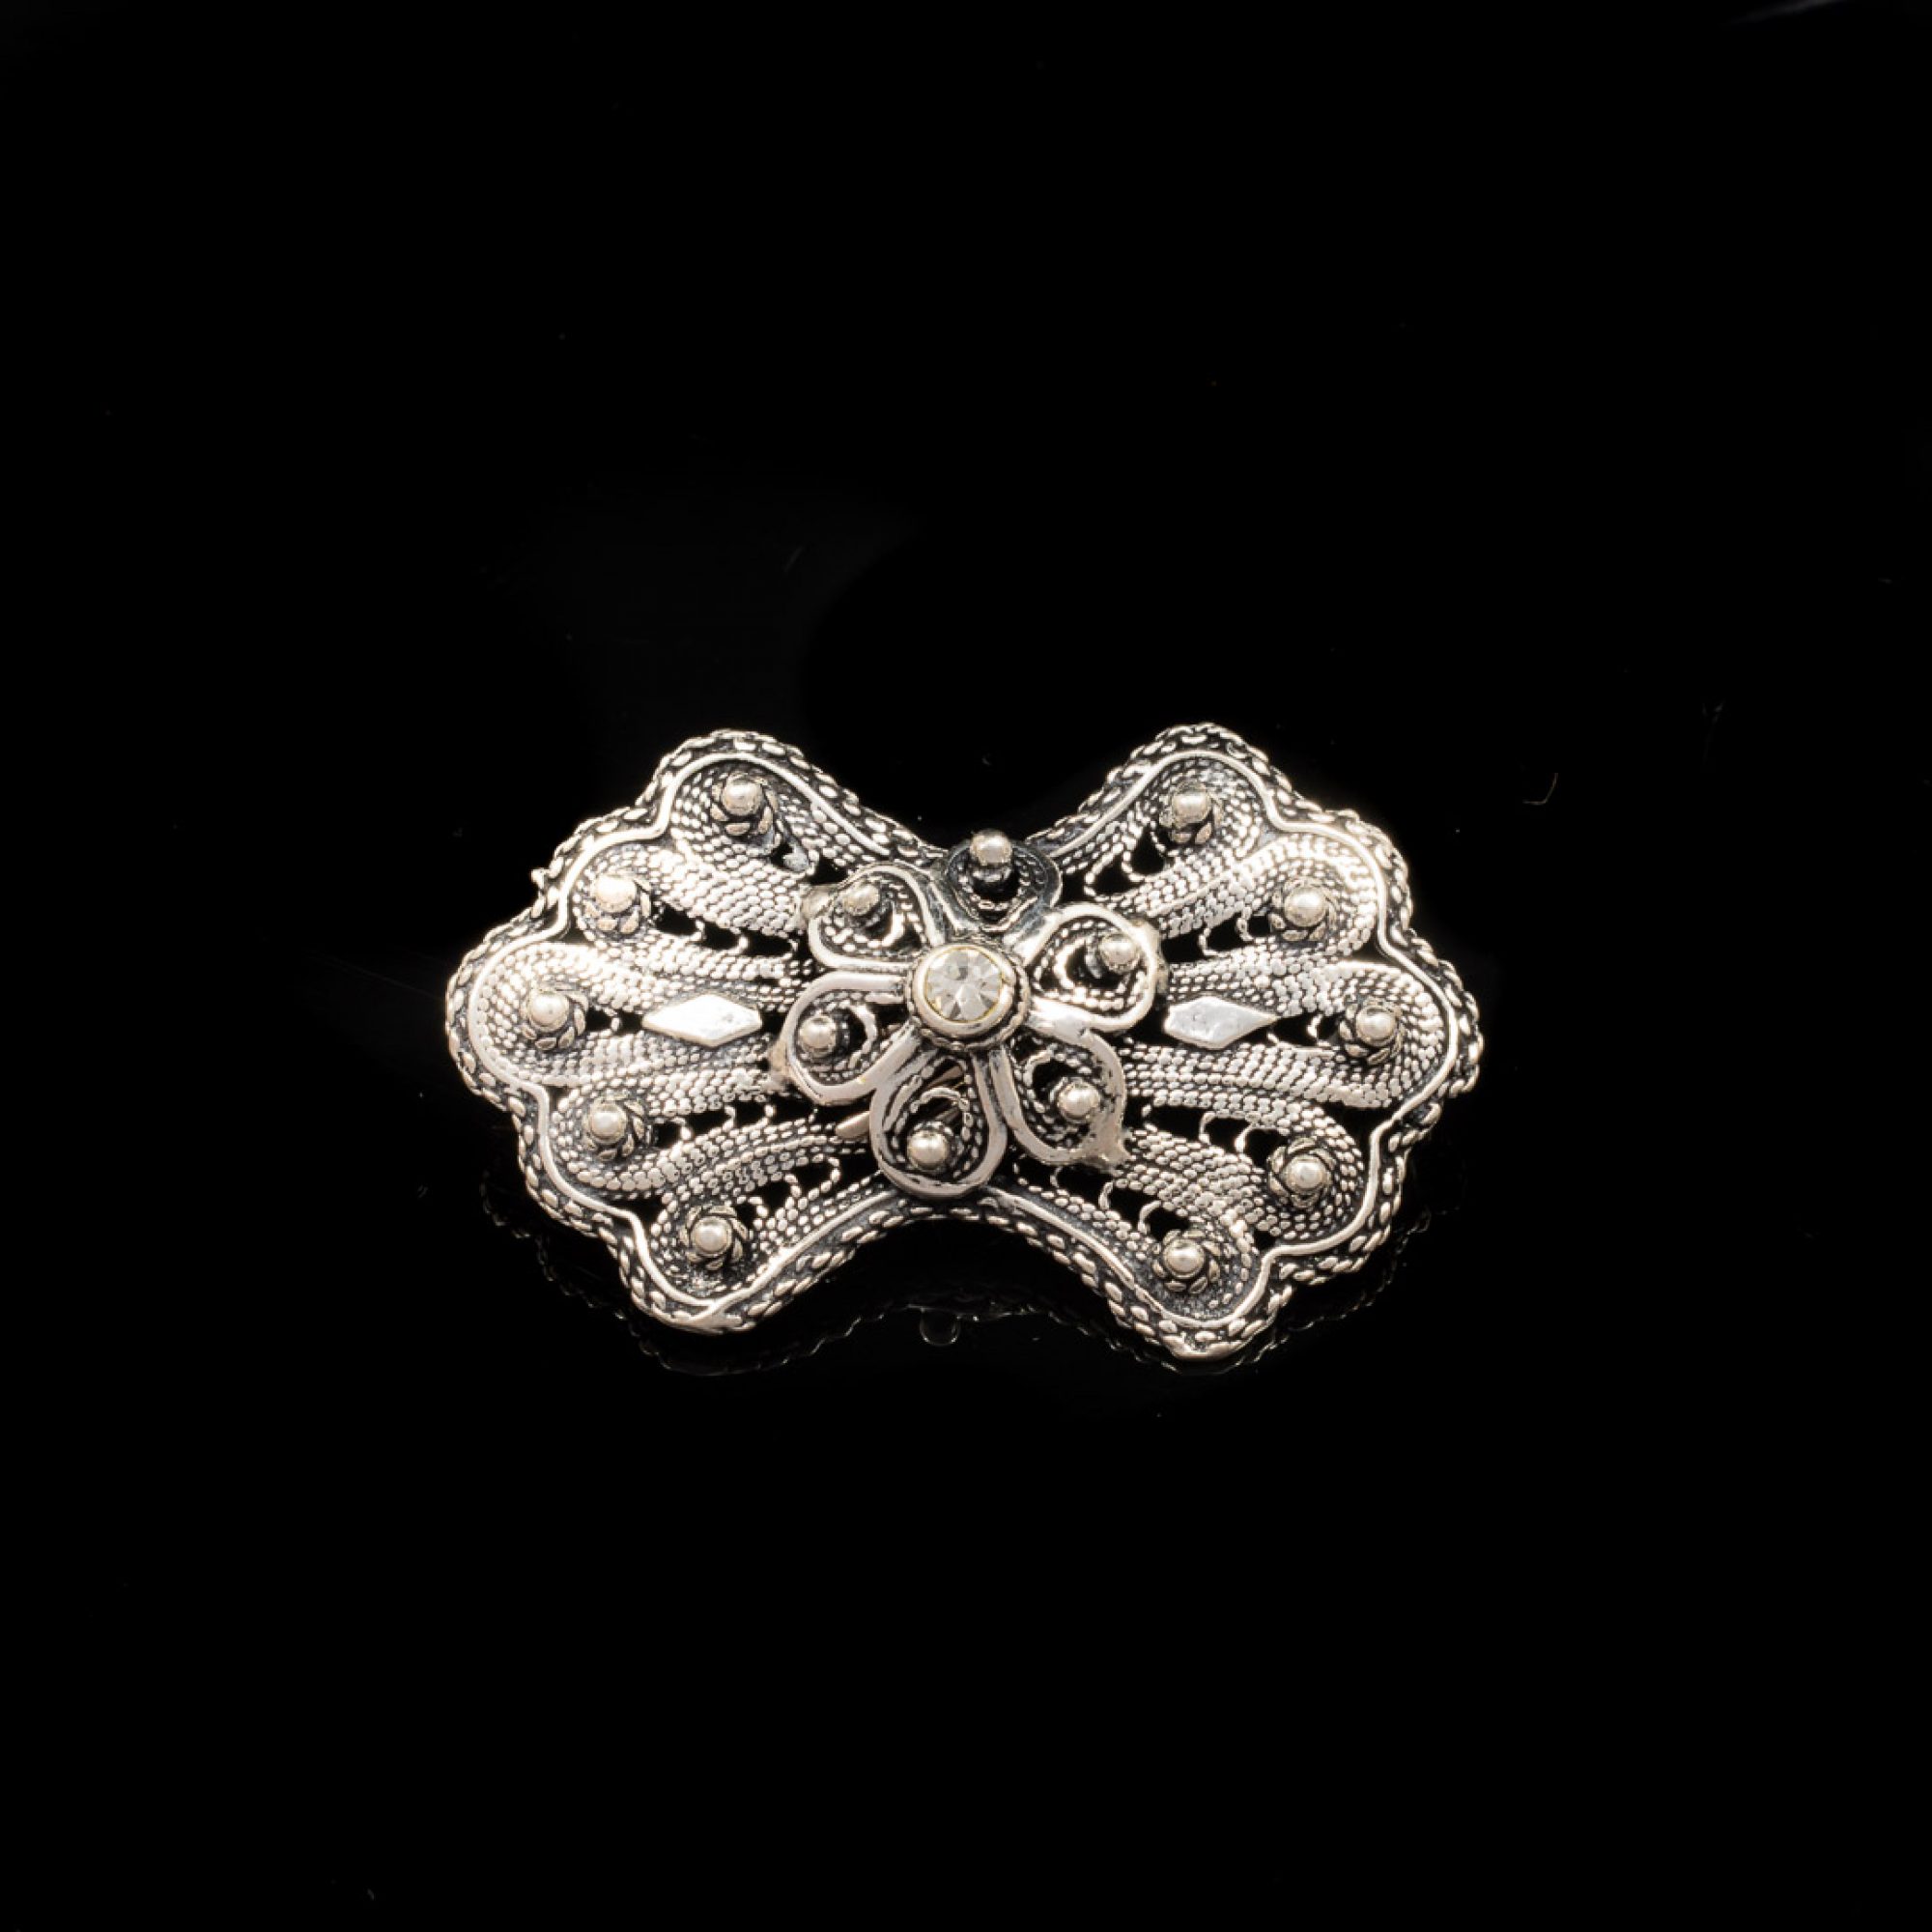 Brooch with zircon stone